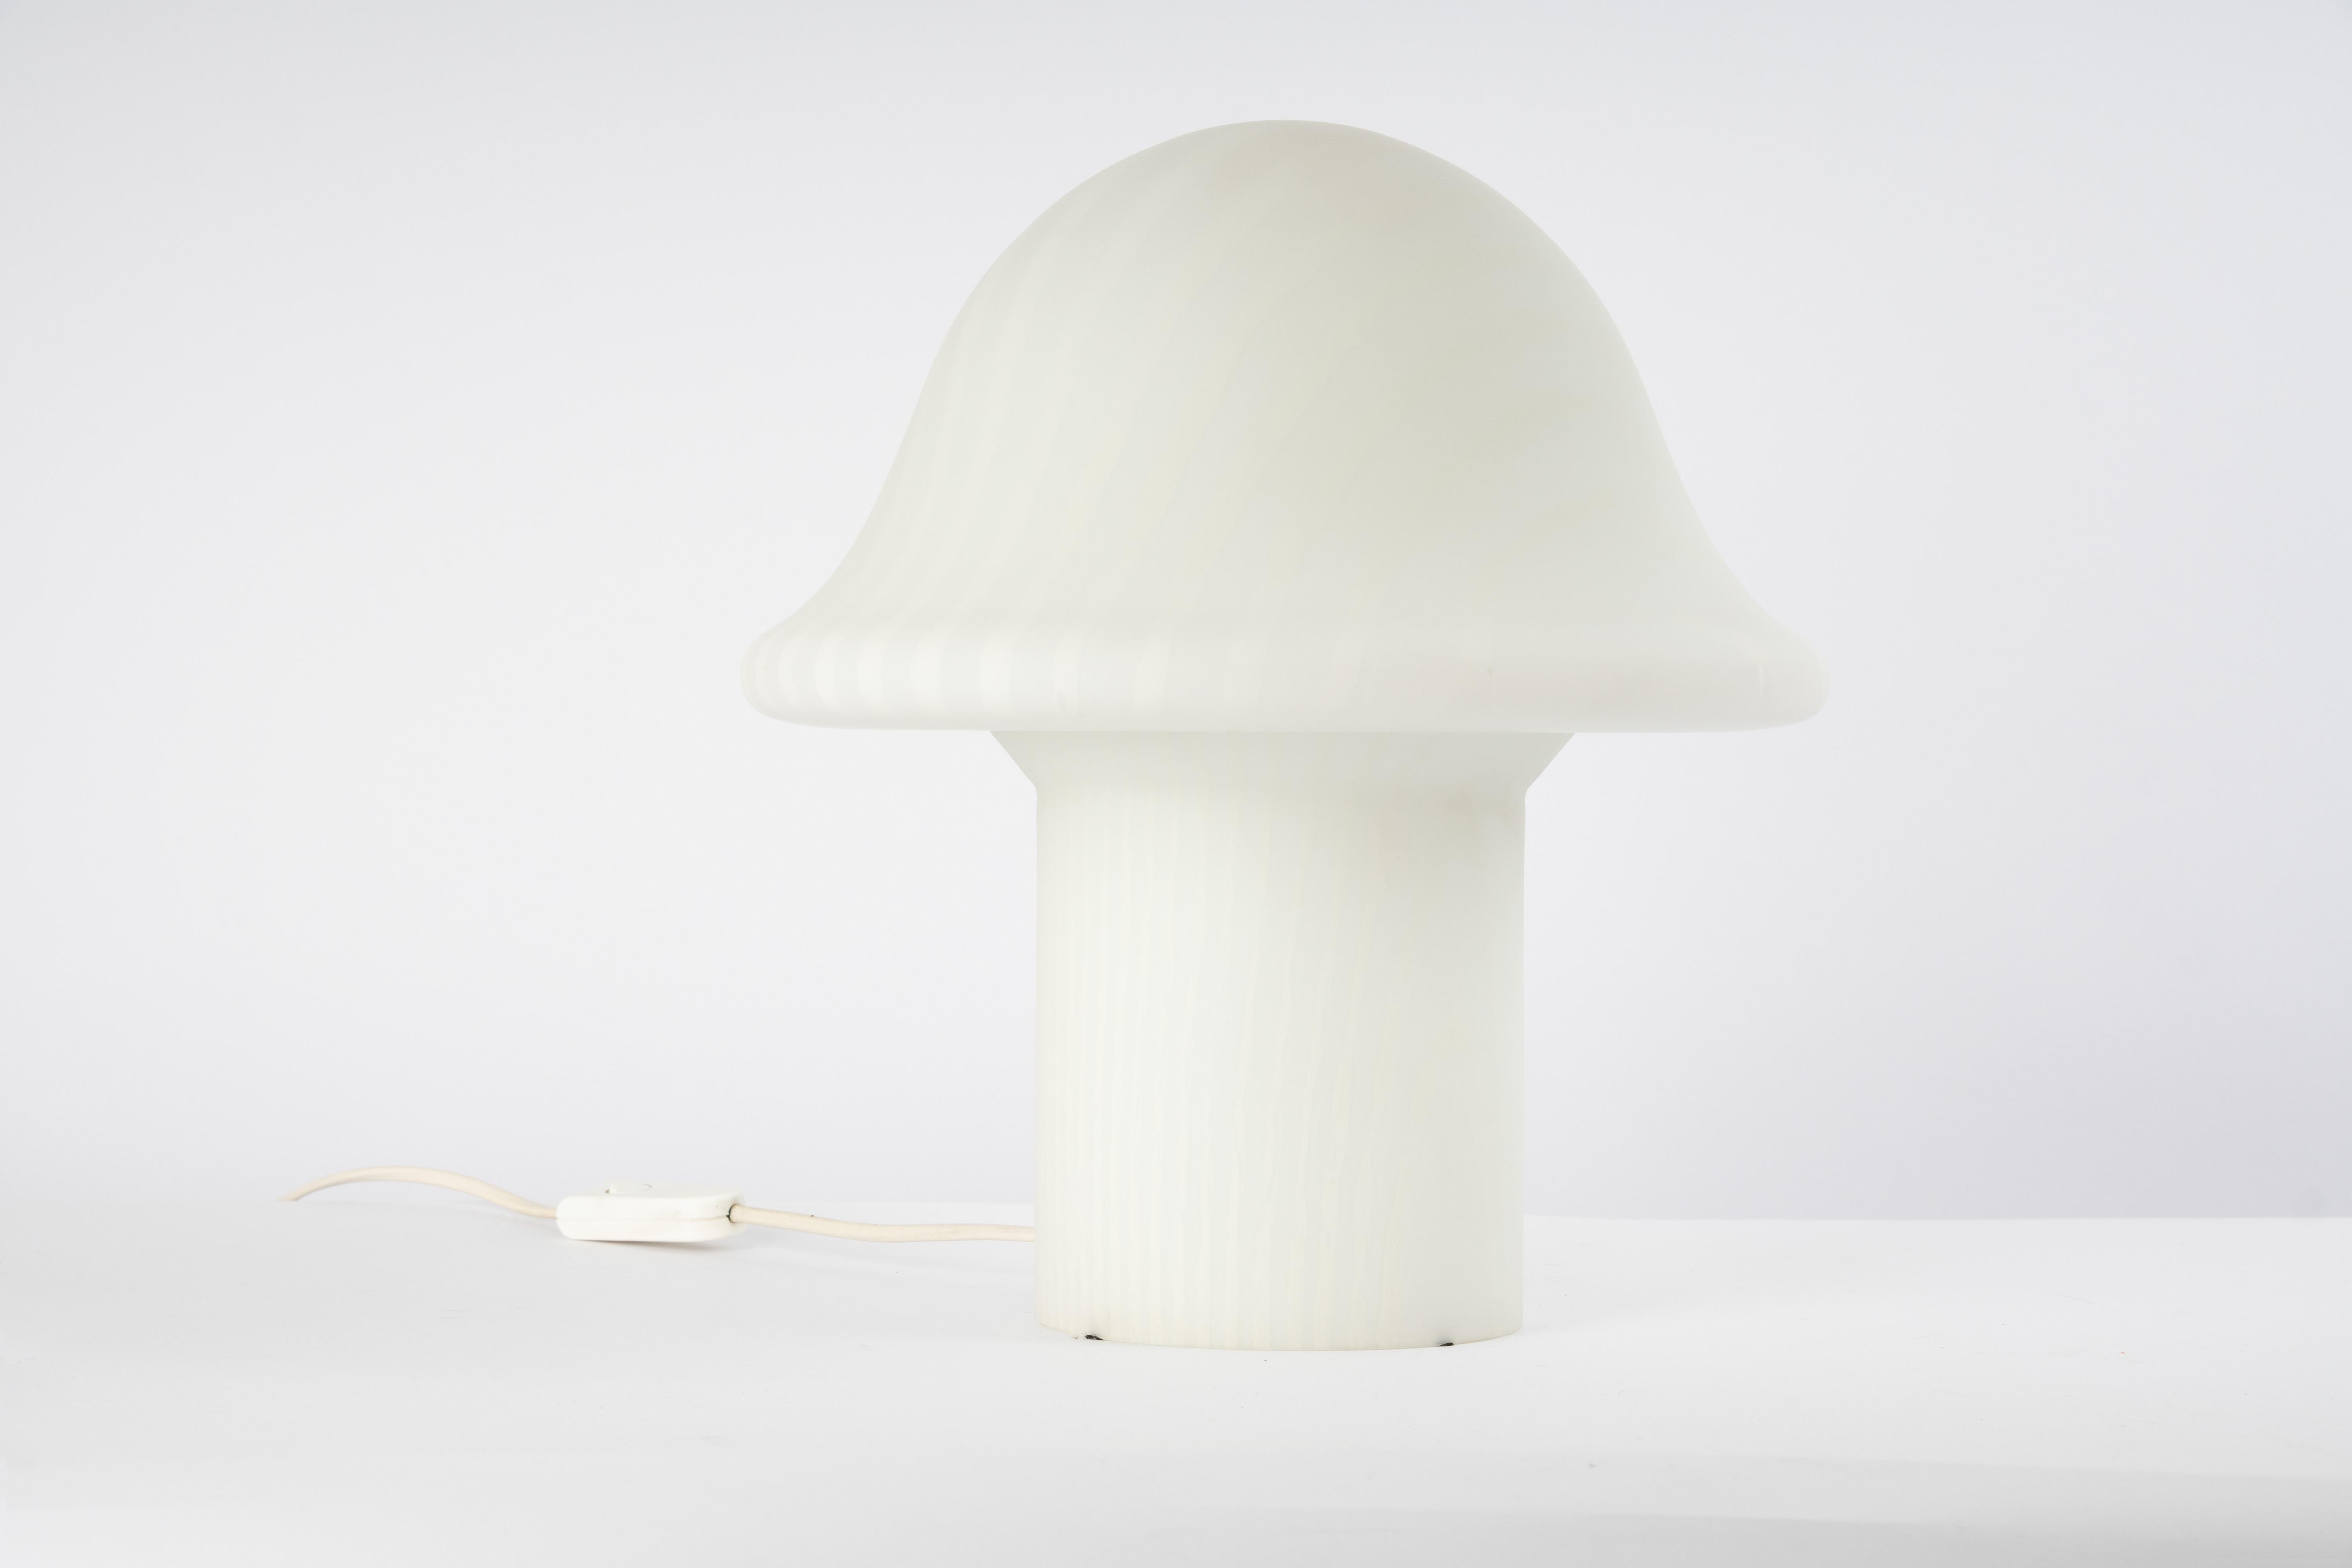 Wonderful midcentury mushroom table lamp by Peill & Putzler, Germany, 1970s.
Made of a single piece of blown and cased glass.
Manufacturer: Peill & Putzler

Stunning glass form and in very good condition. Cleaned, well-wired, and ready to use. Each